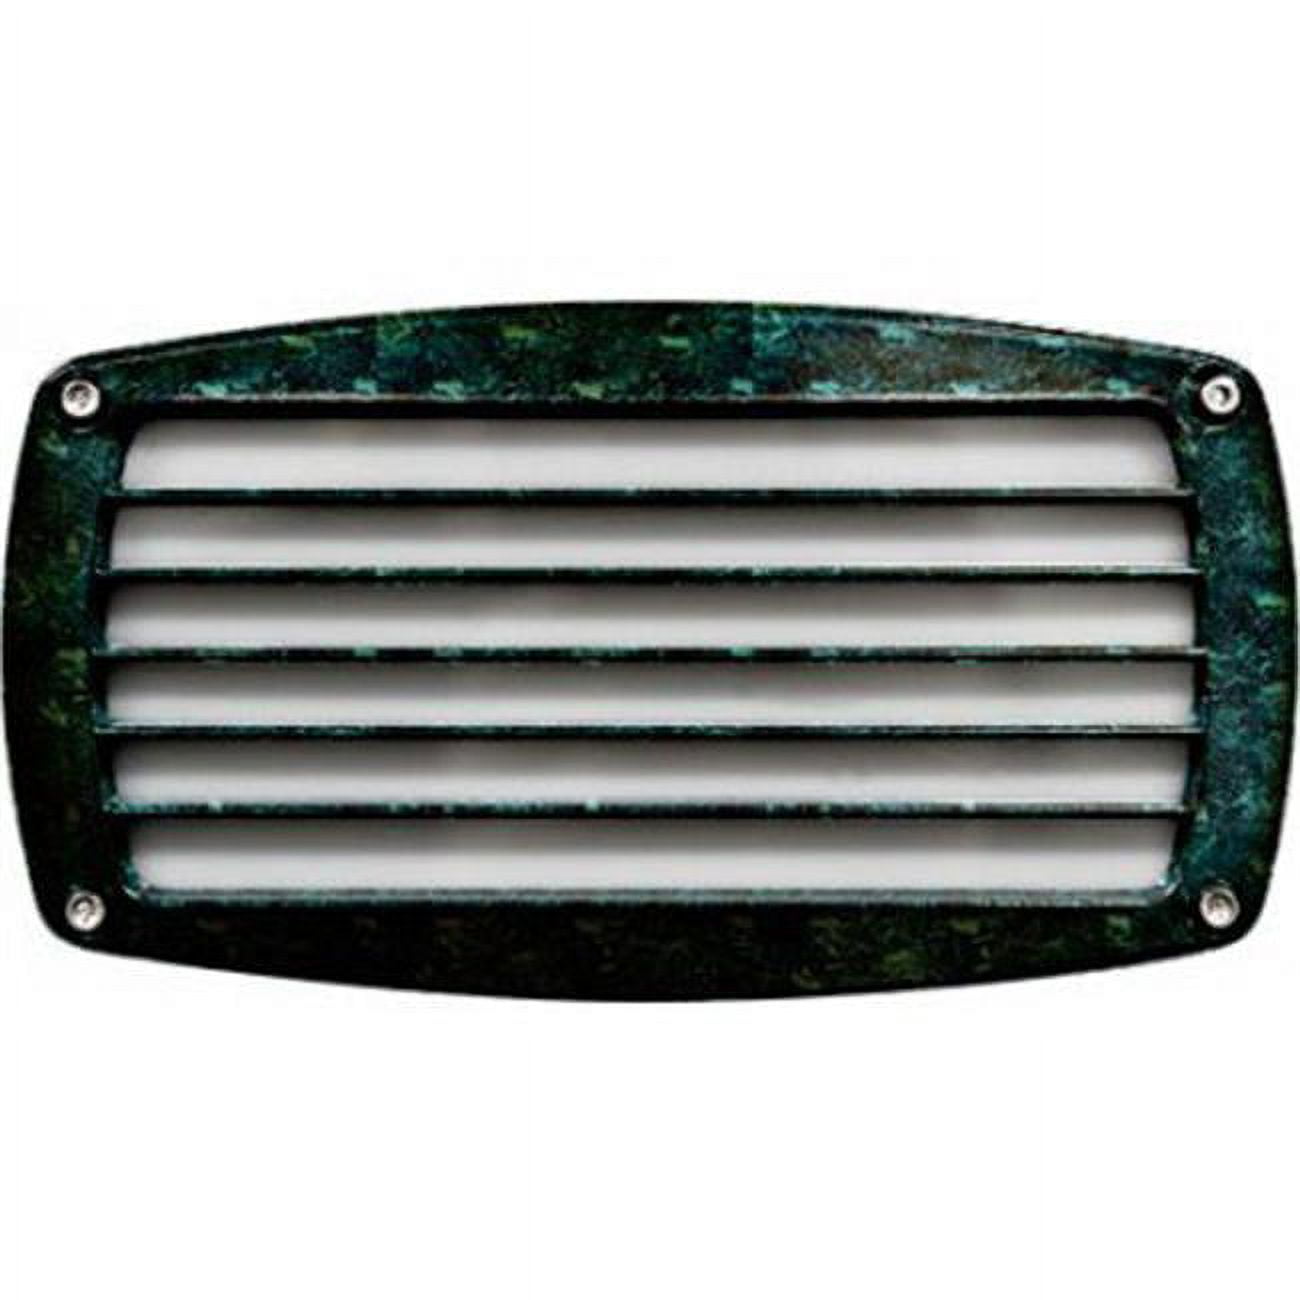 Recessed Louvered Brick, Step & Wall Fixture, Verde Green